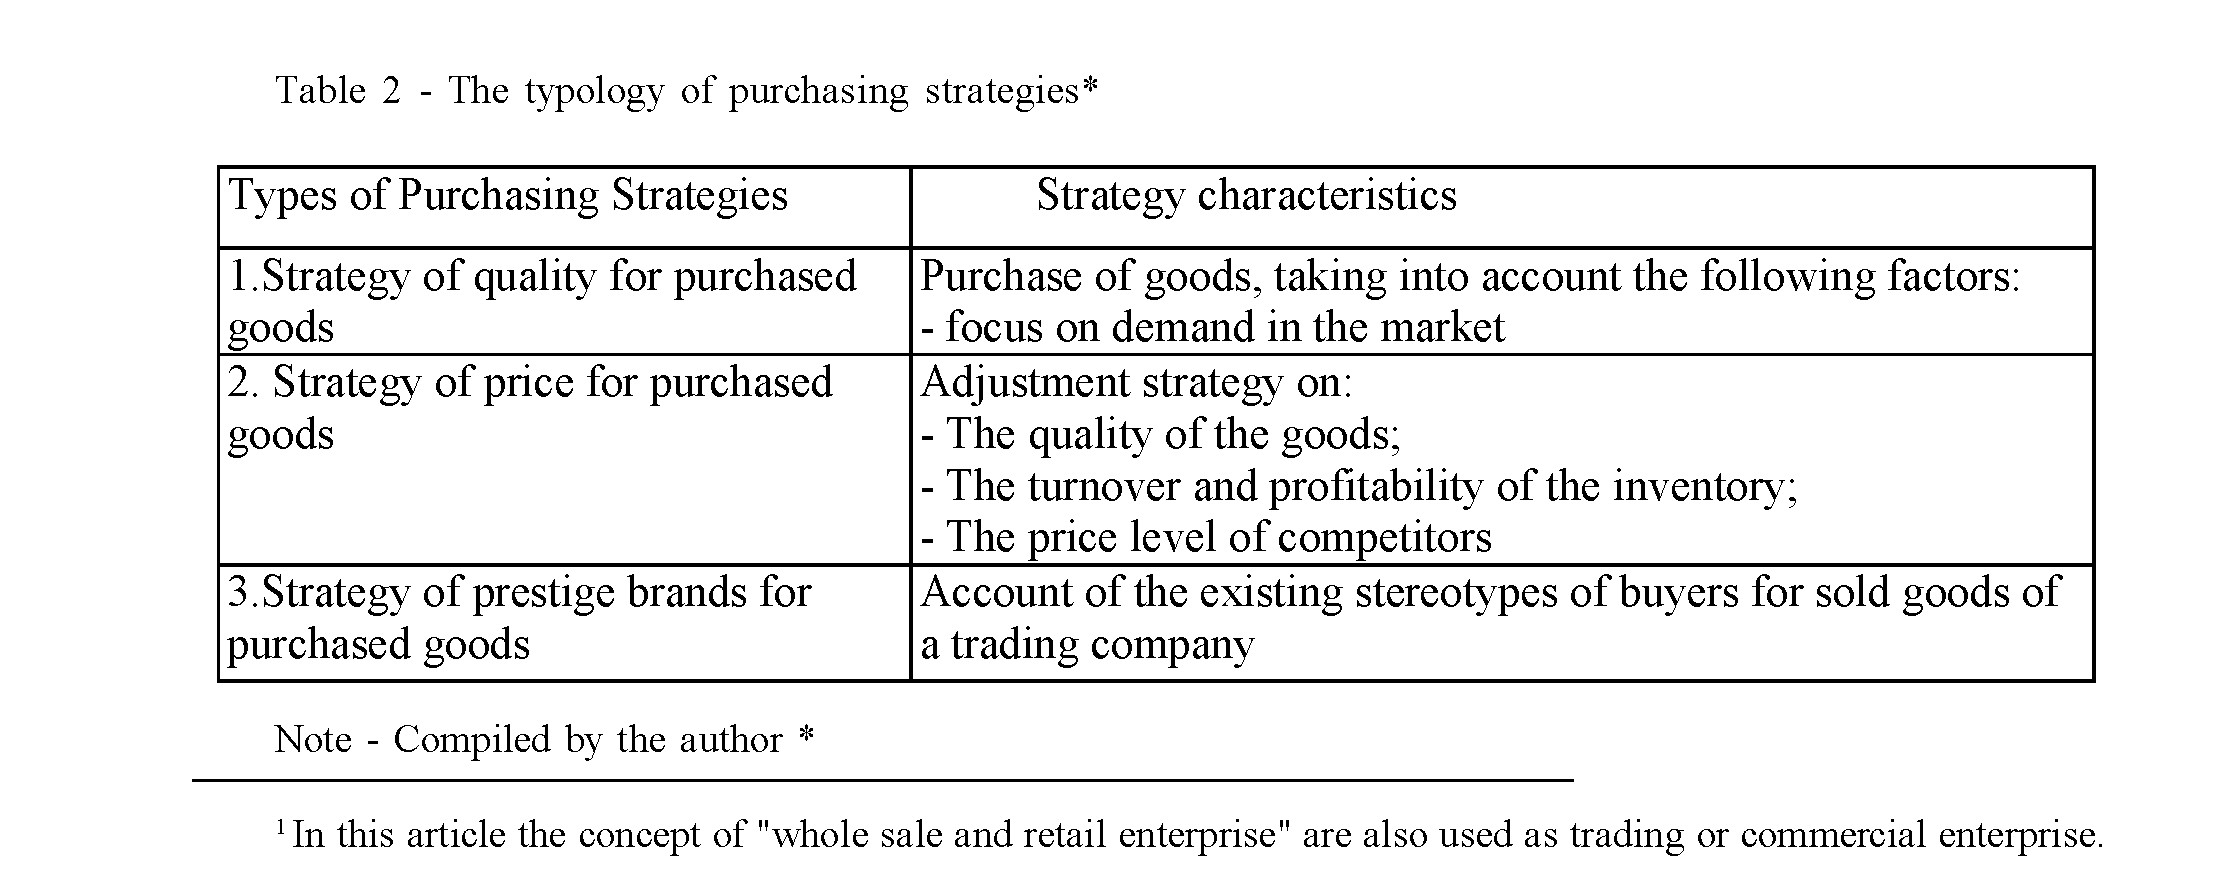 Strategic management tools used in the strategic development of wholesale and retail trade enterprise